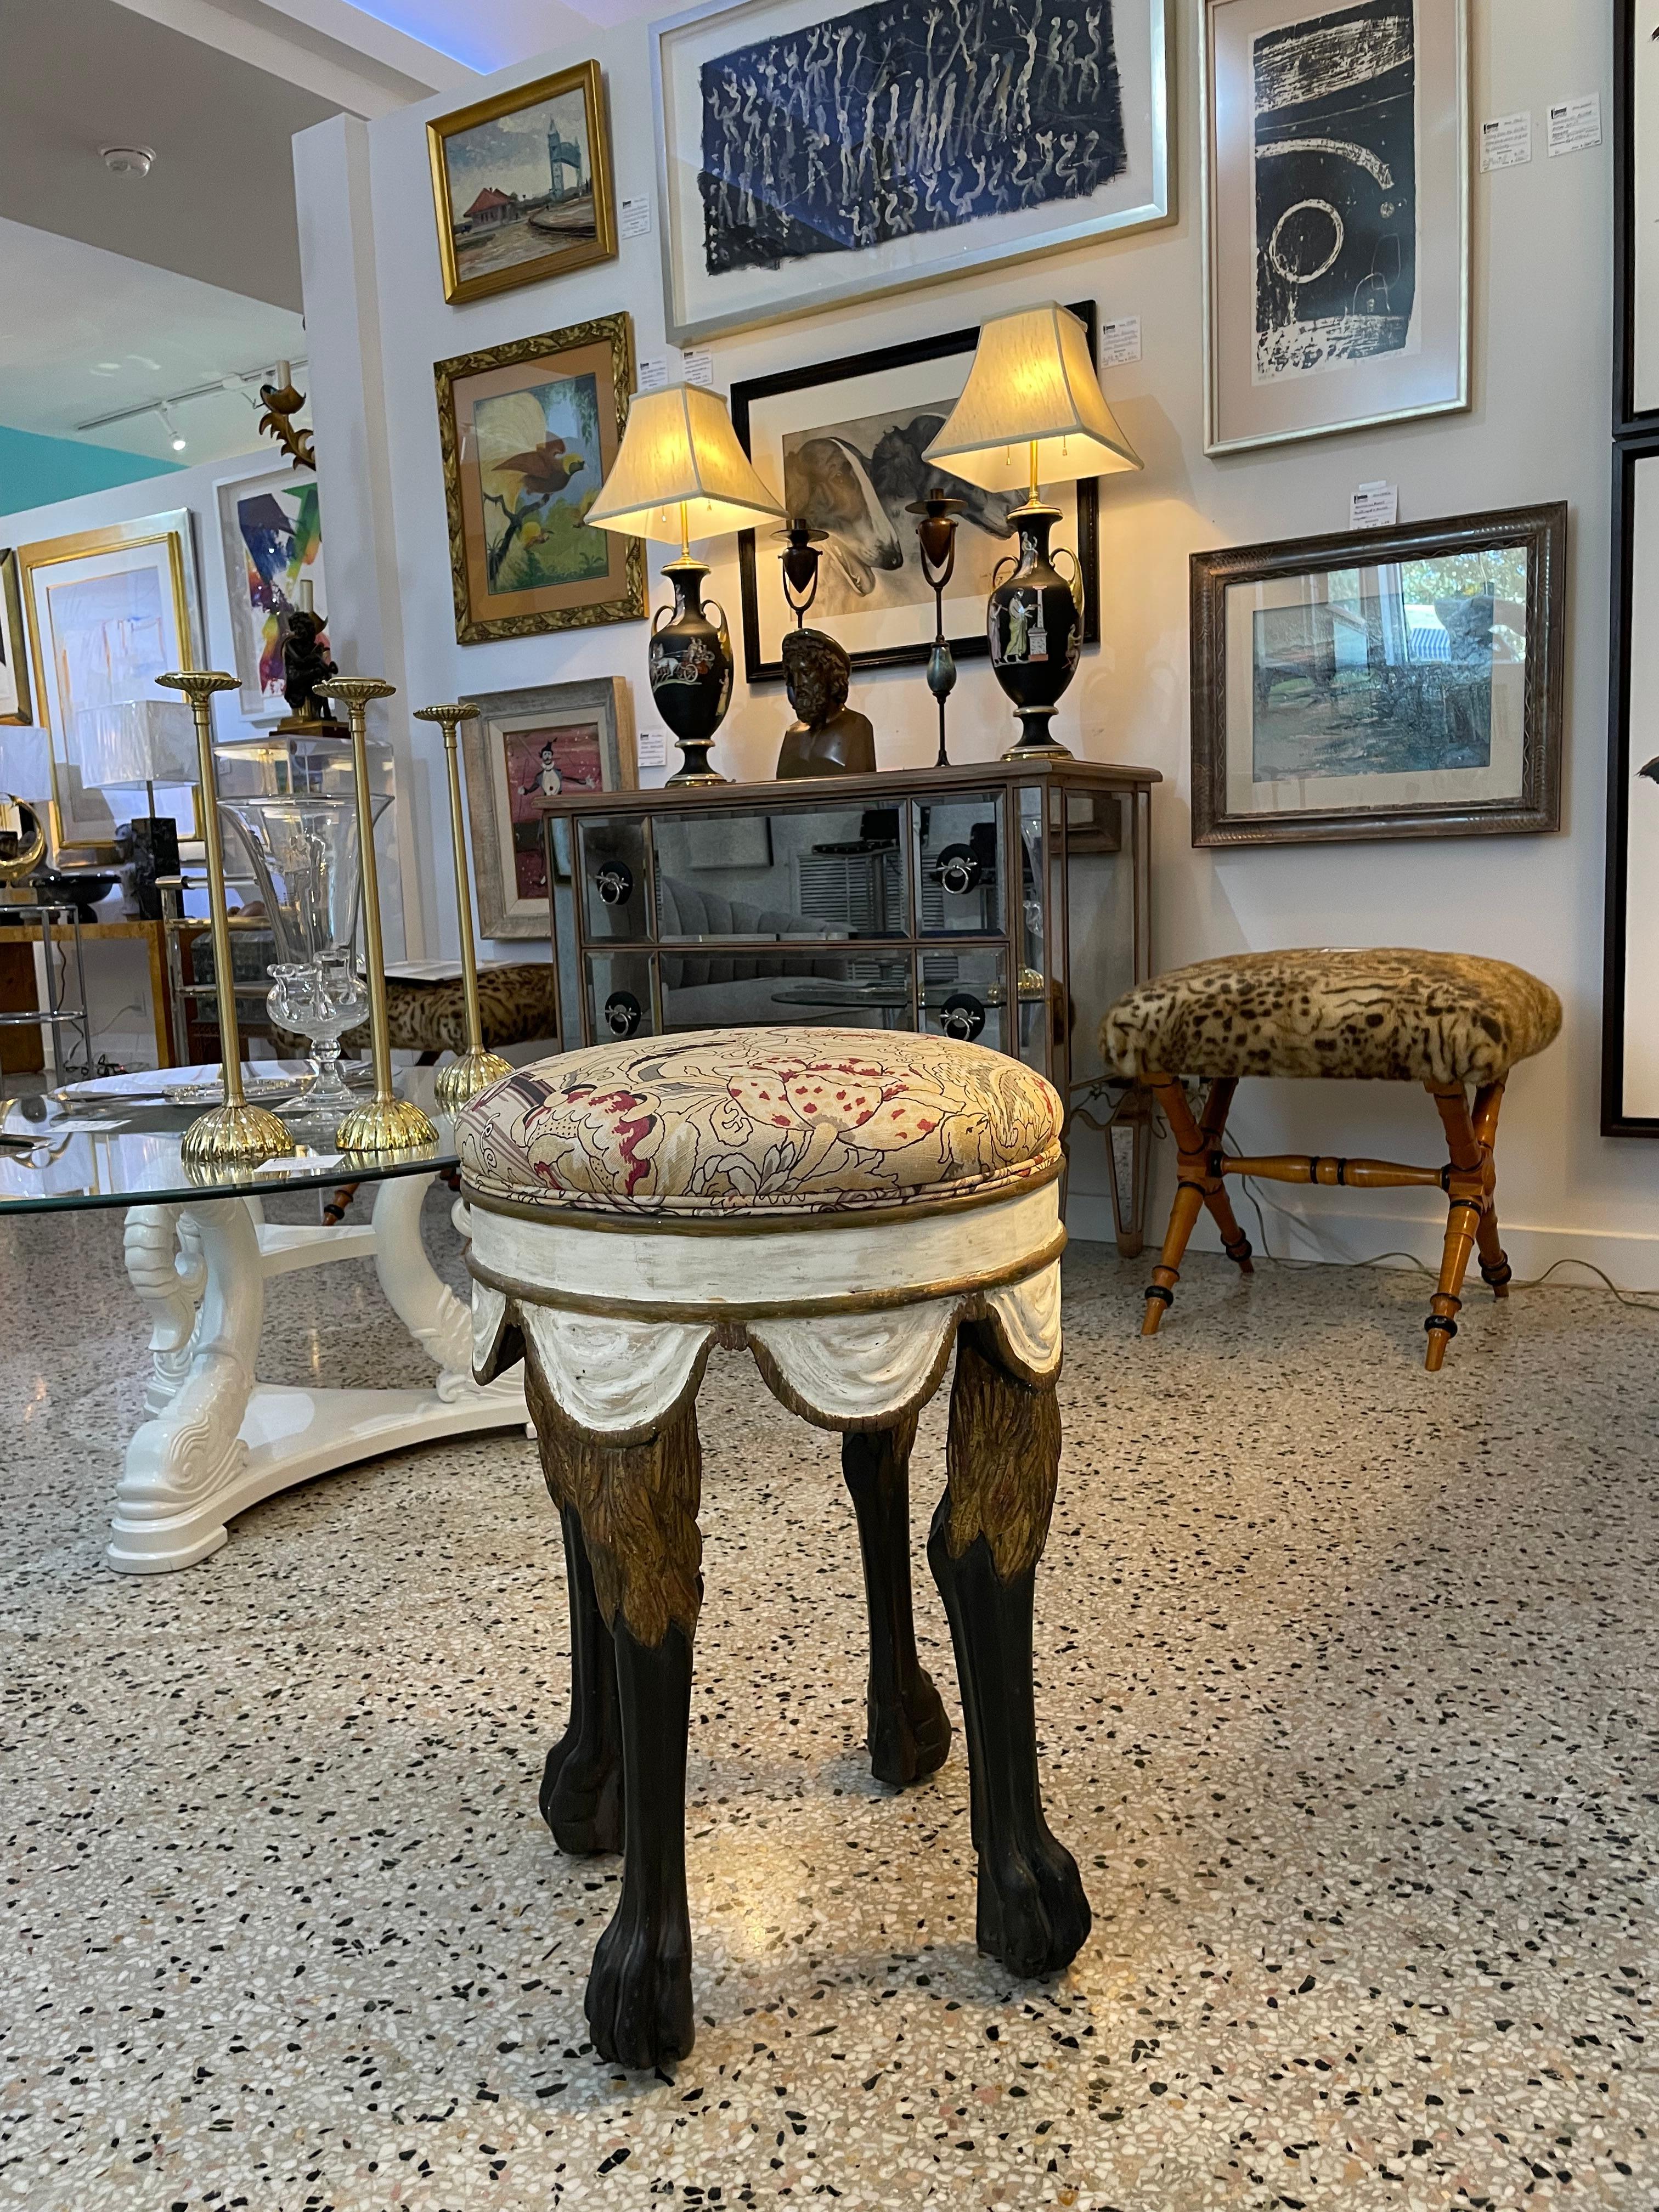 This stylish and chic Italian stool dates to the 1990s and is hand carved and hand painted, with swagged fabric and stylized lions leg and paws.  The woven fabric is a Renaissance motif of birds and flora.

it is possible that this was once used as